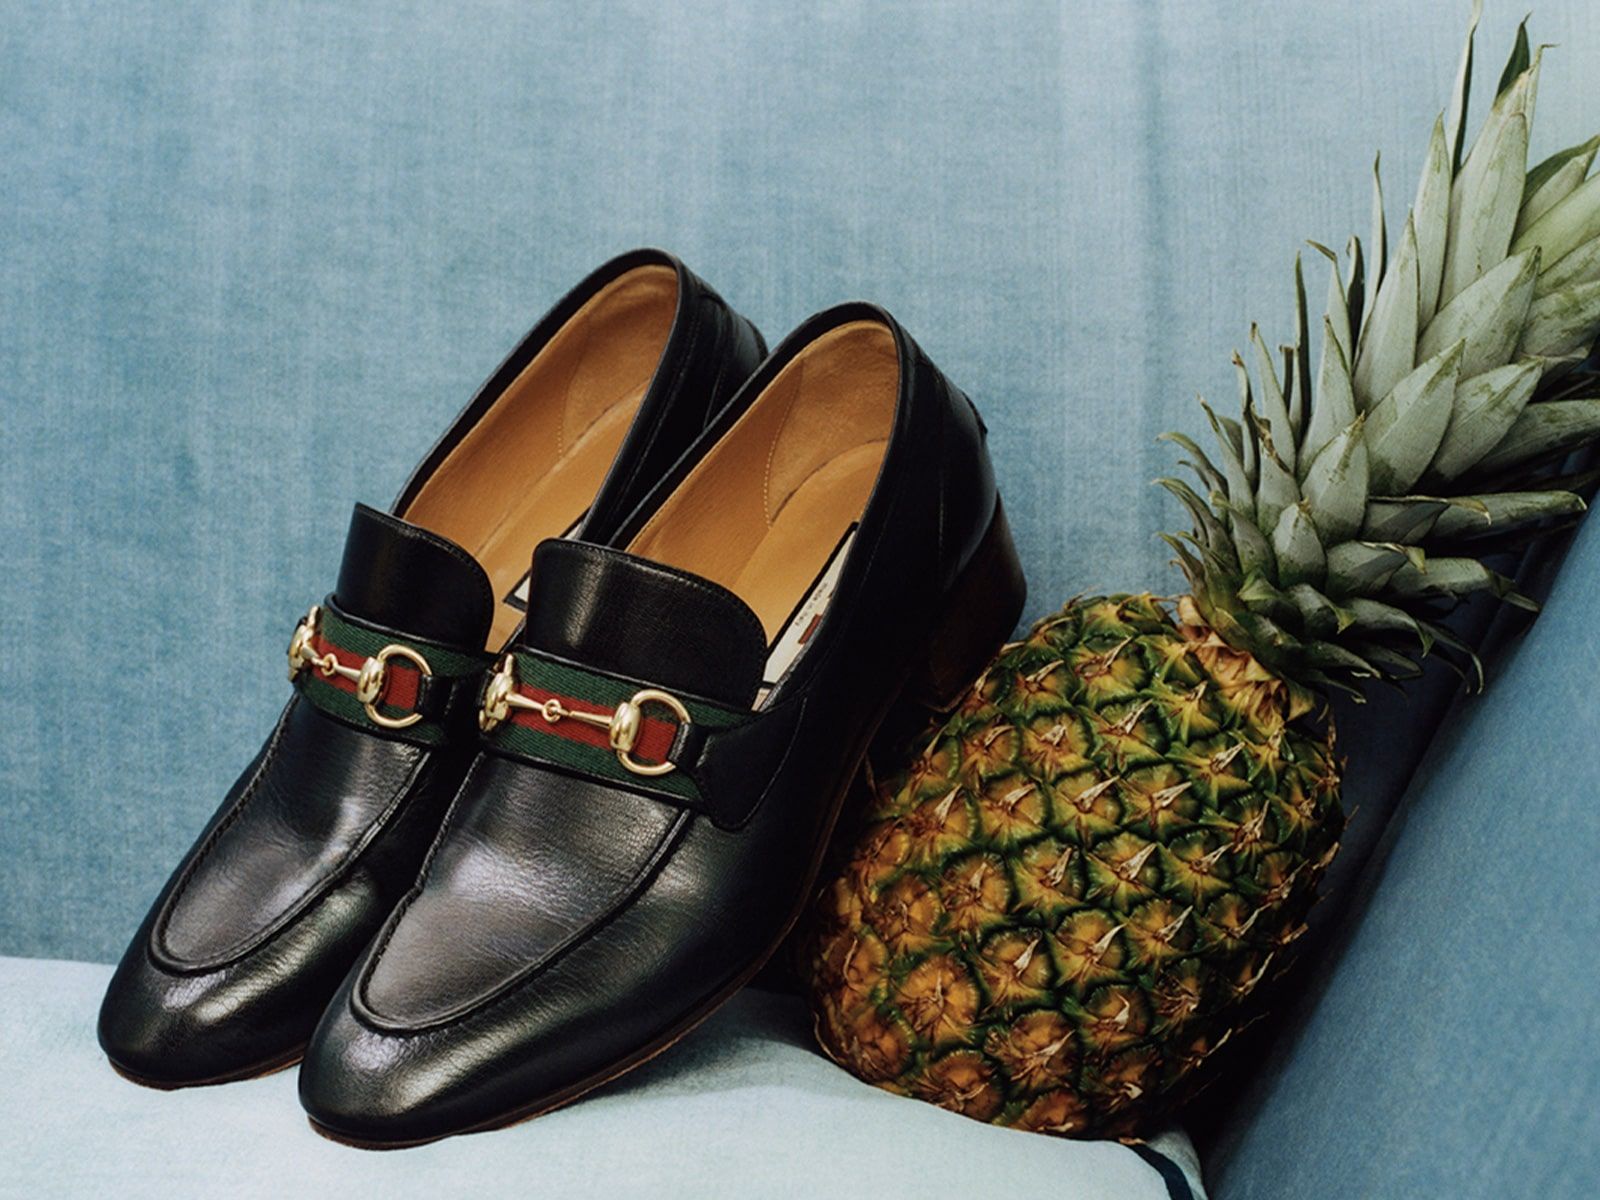 Gucci presents the 'Gucci Pineapple' collection